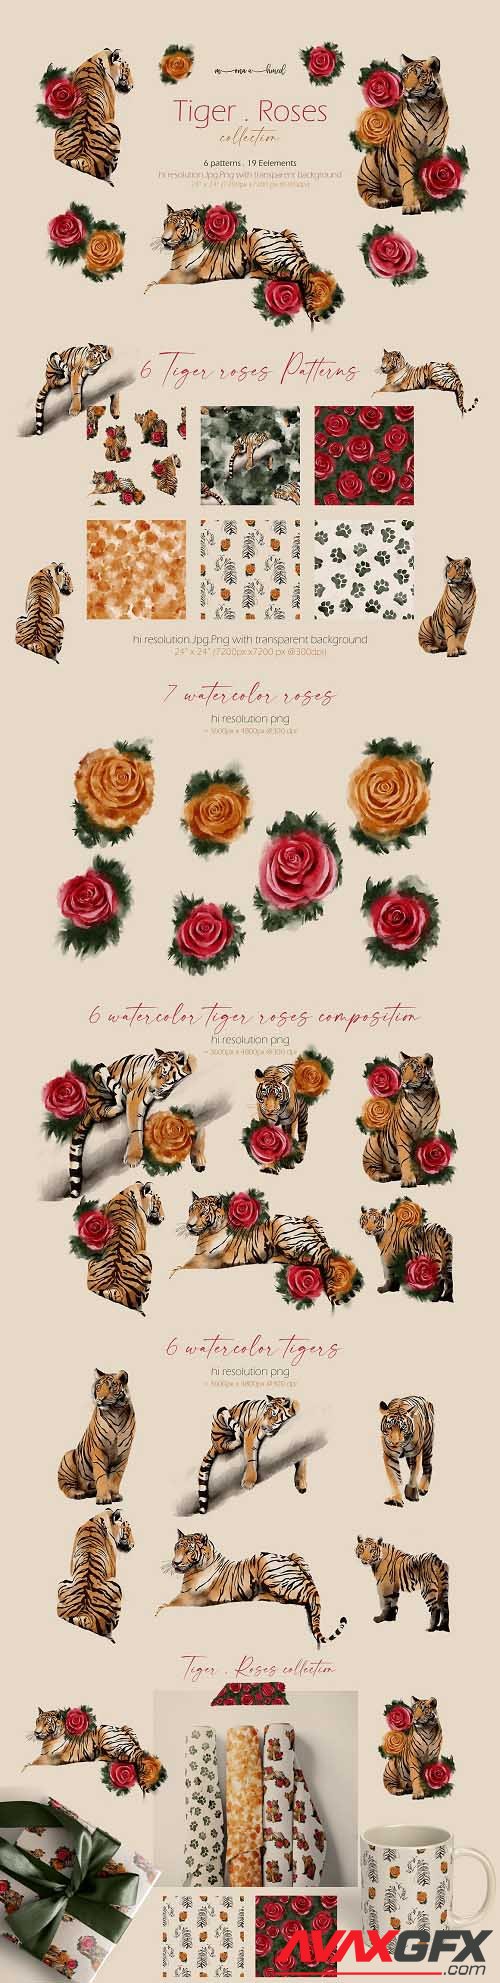 Tigers & Roses watercolor collection - 6941142